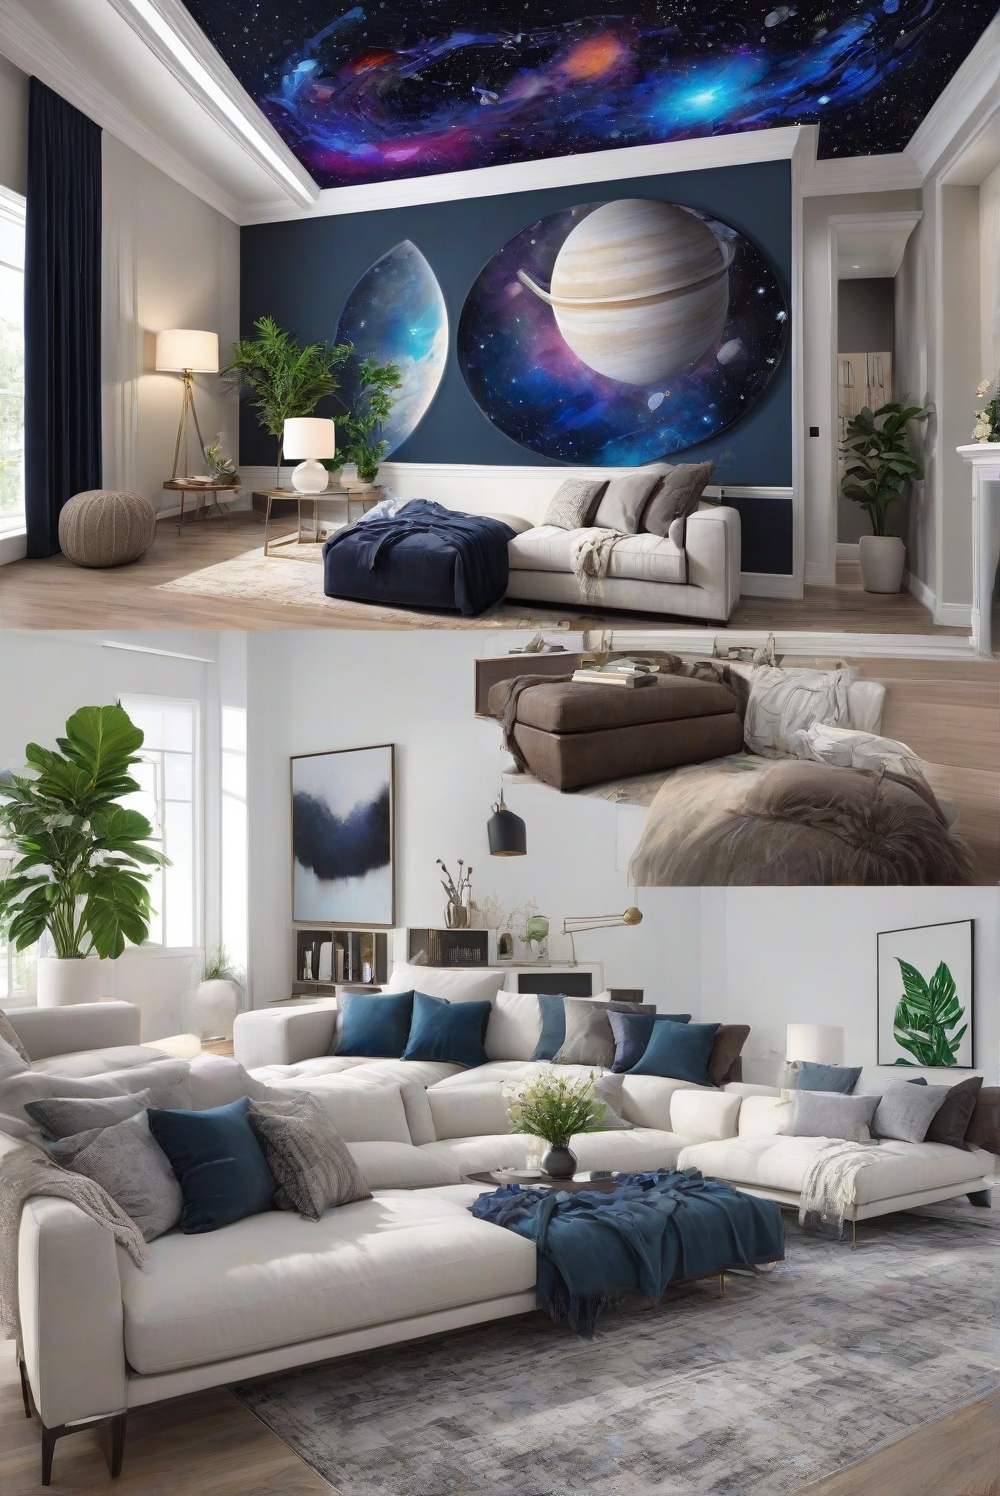 Explore, Space exploration, Space discovery, Space travel, Deep space exploration, Space adventure, Space discovery mission home decorating, home interior, home interior design, home decor interior design, space planning, interior design space planning, decorating interiors